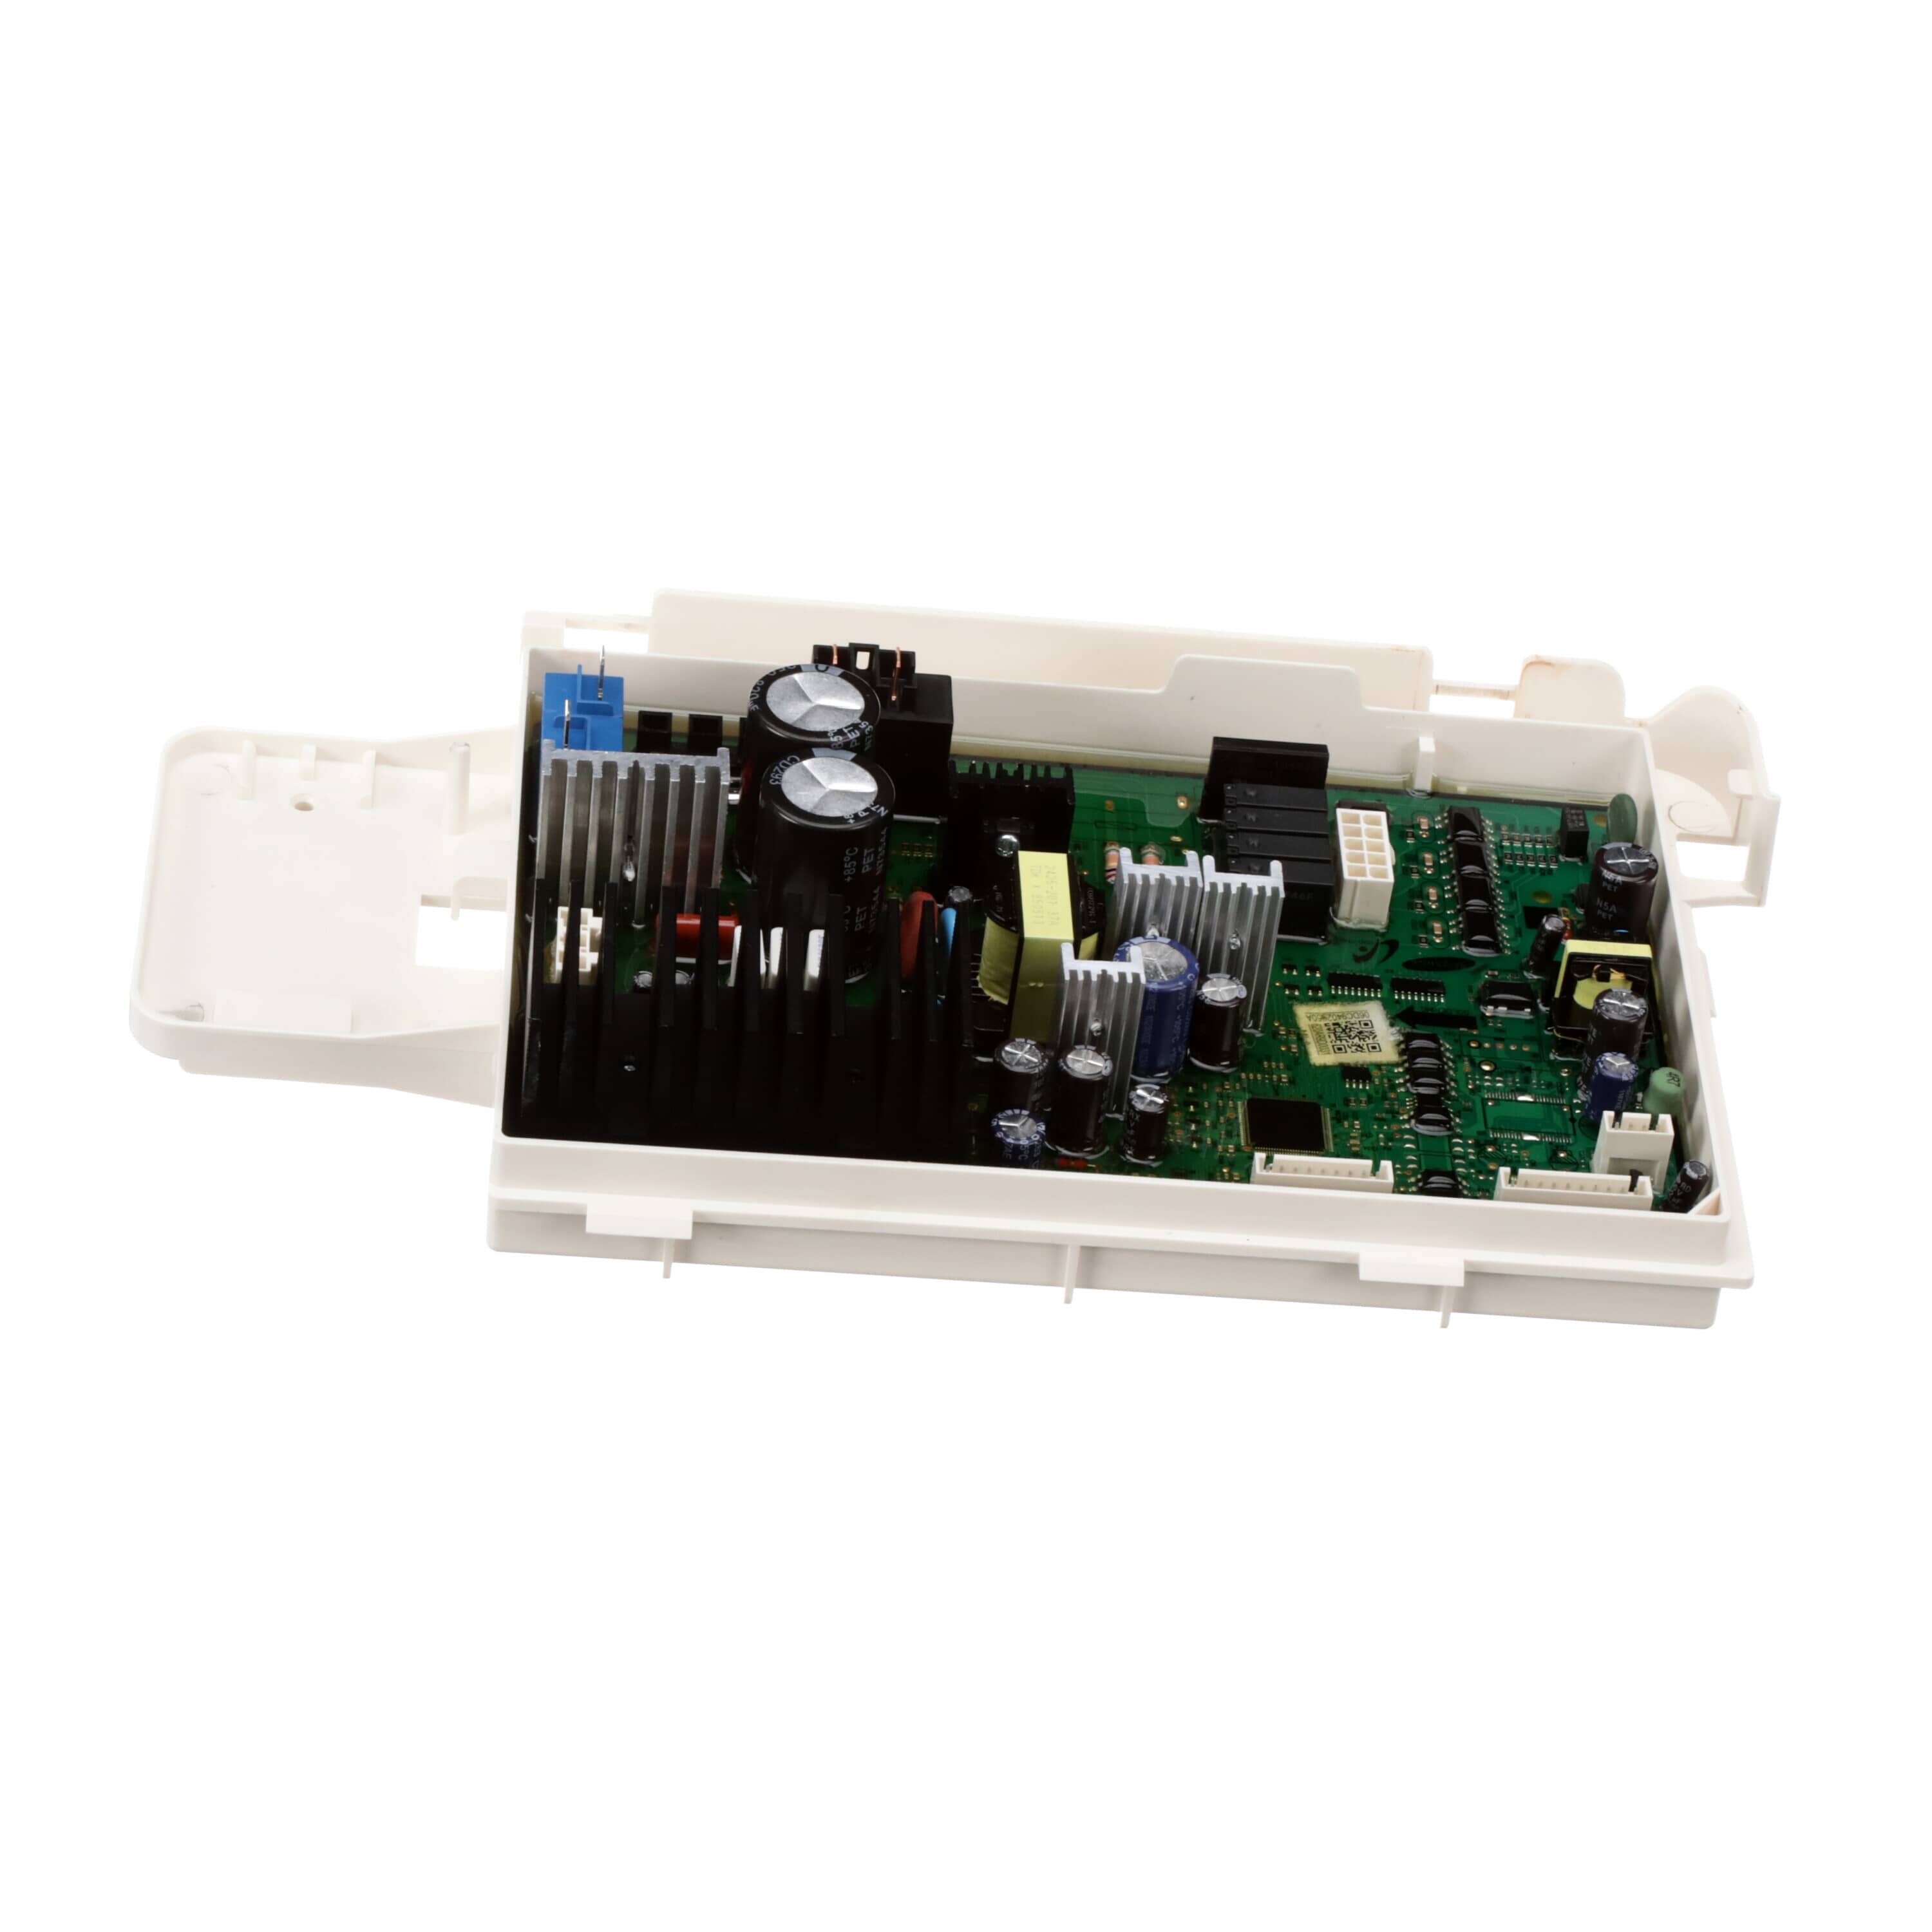 Samsung DC92-01063A Washer Electronic Control Board